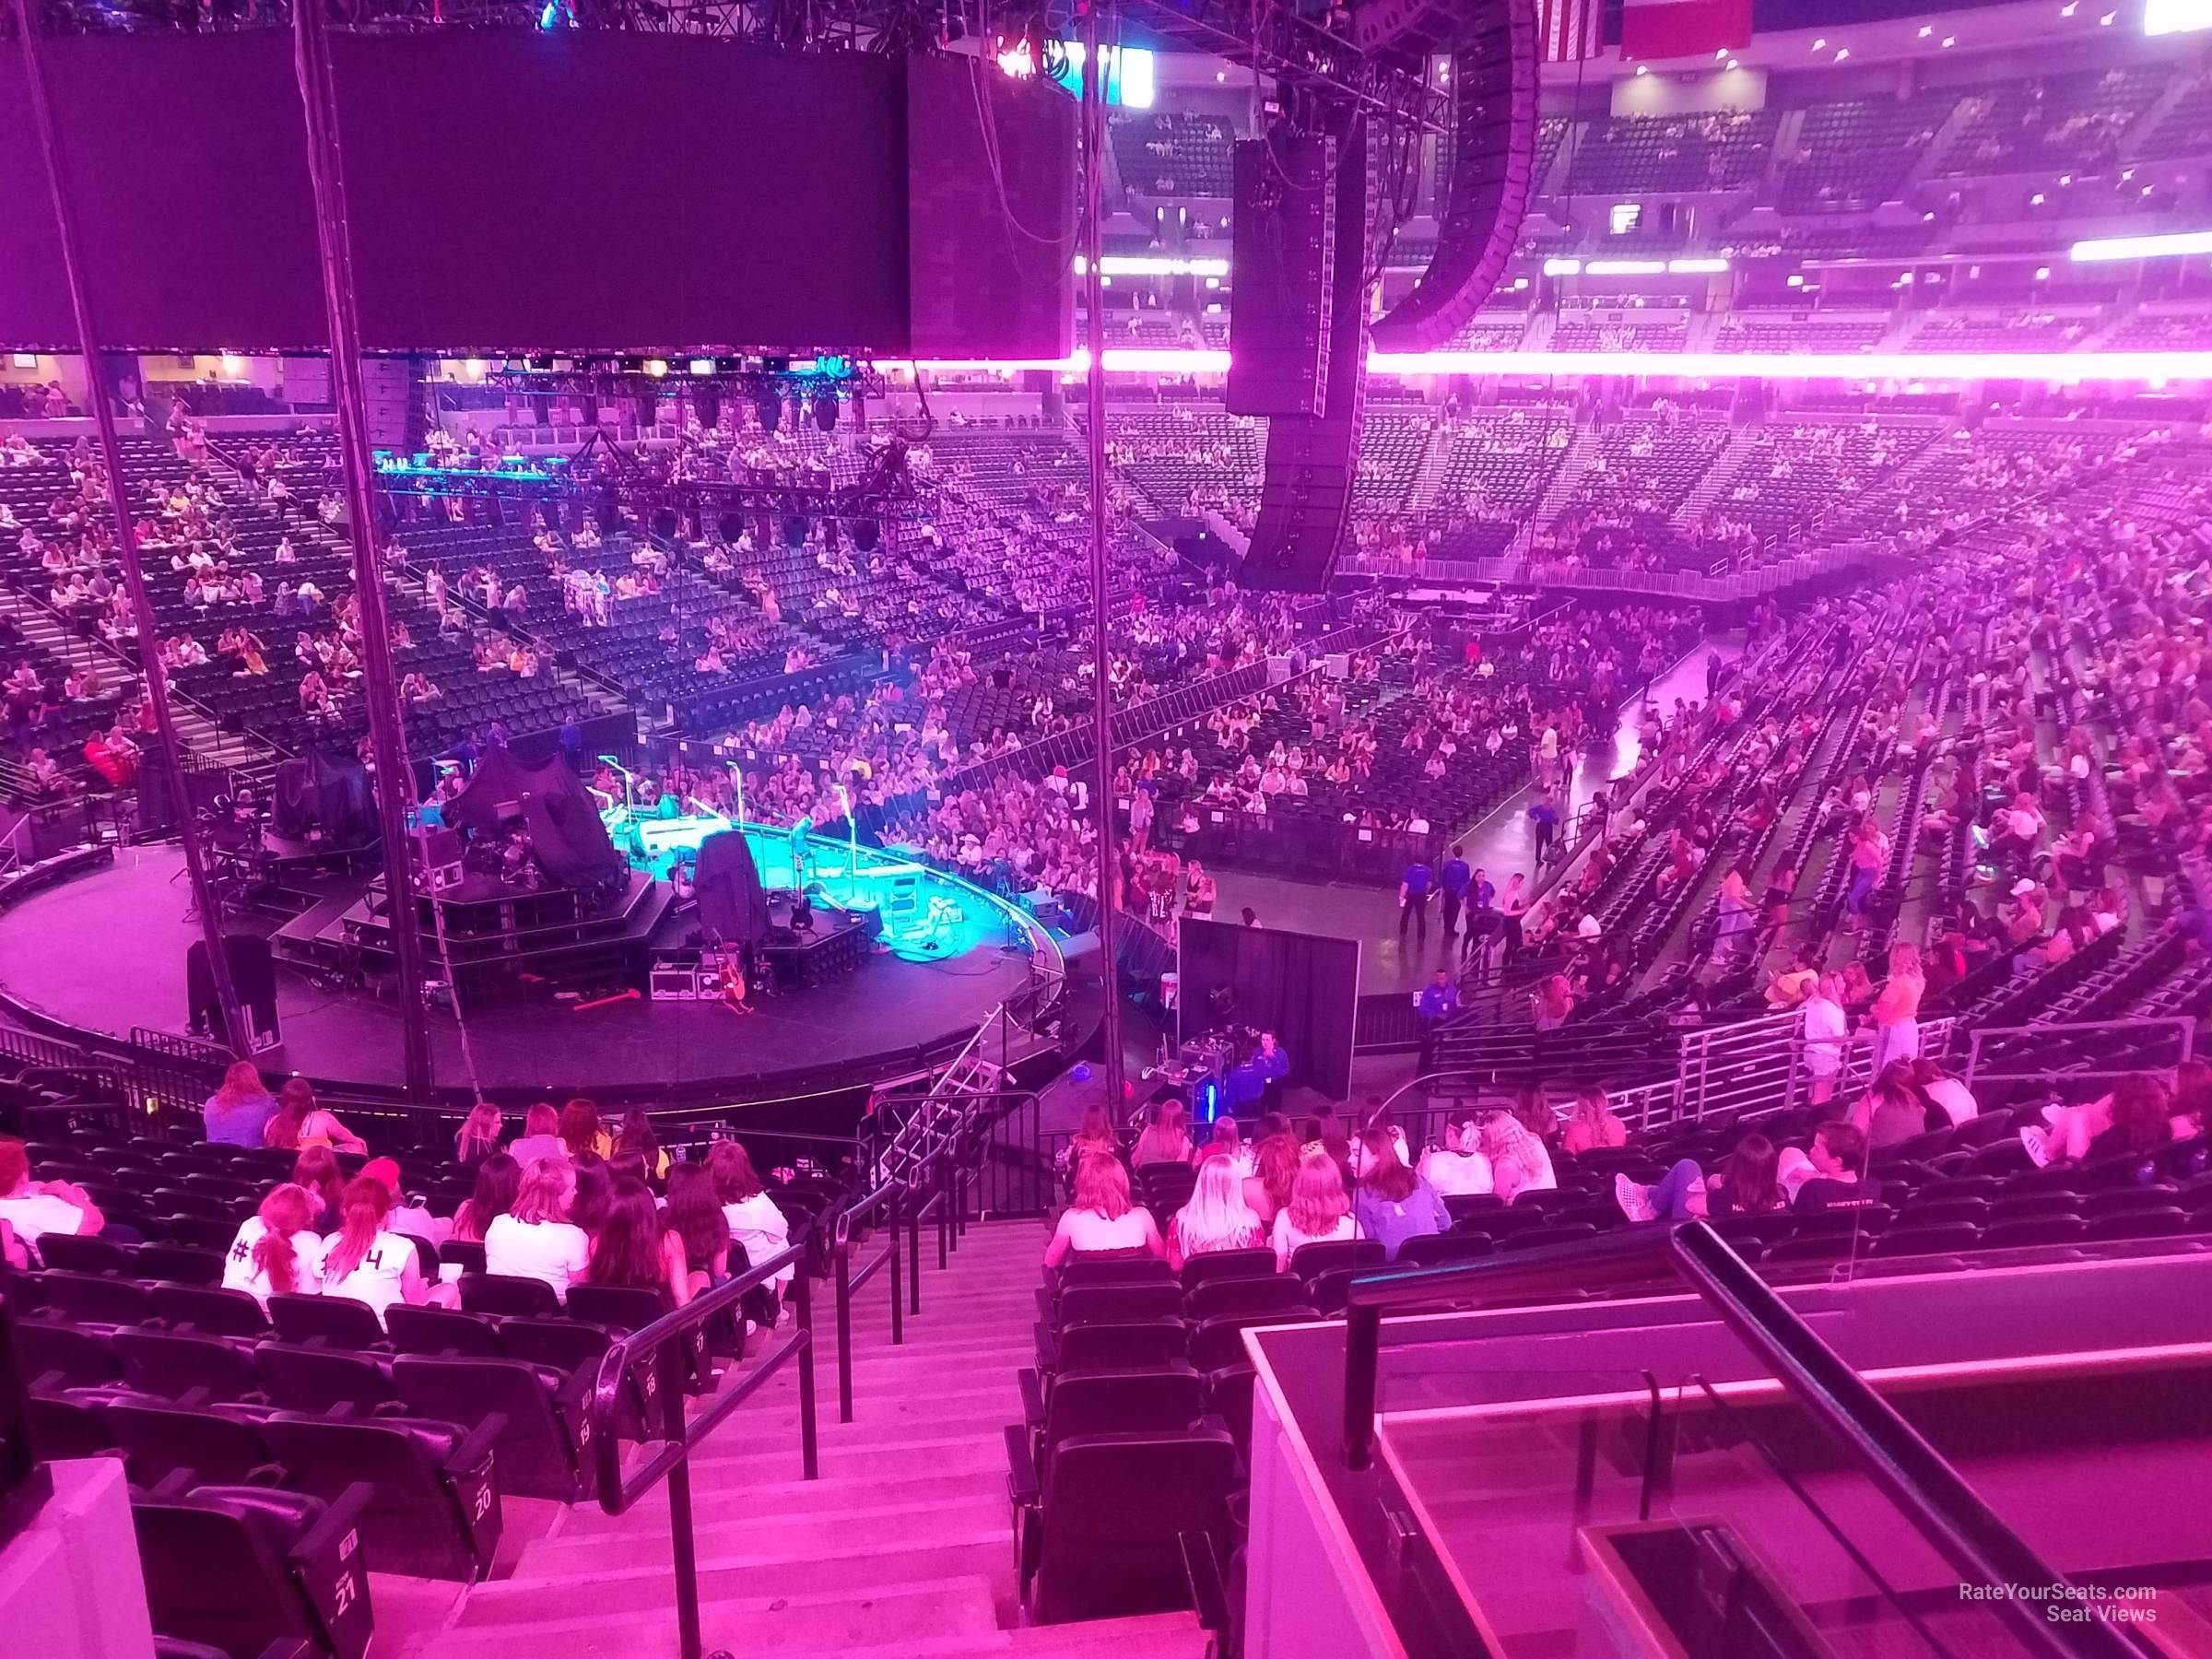 section 132, row 19 seat view  for concert - ball arena